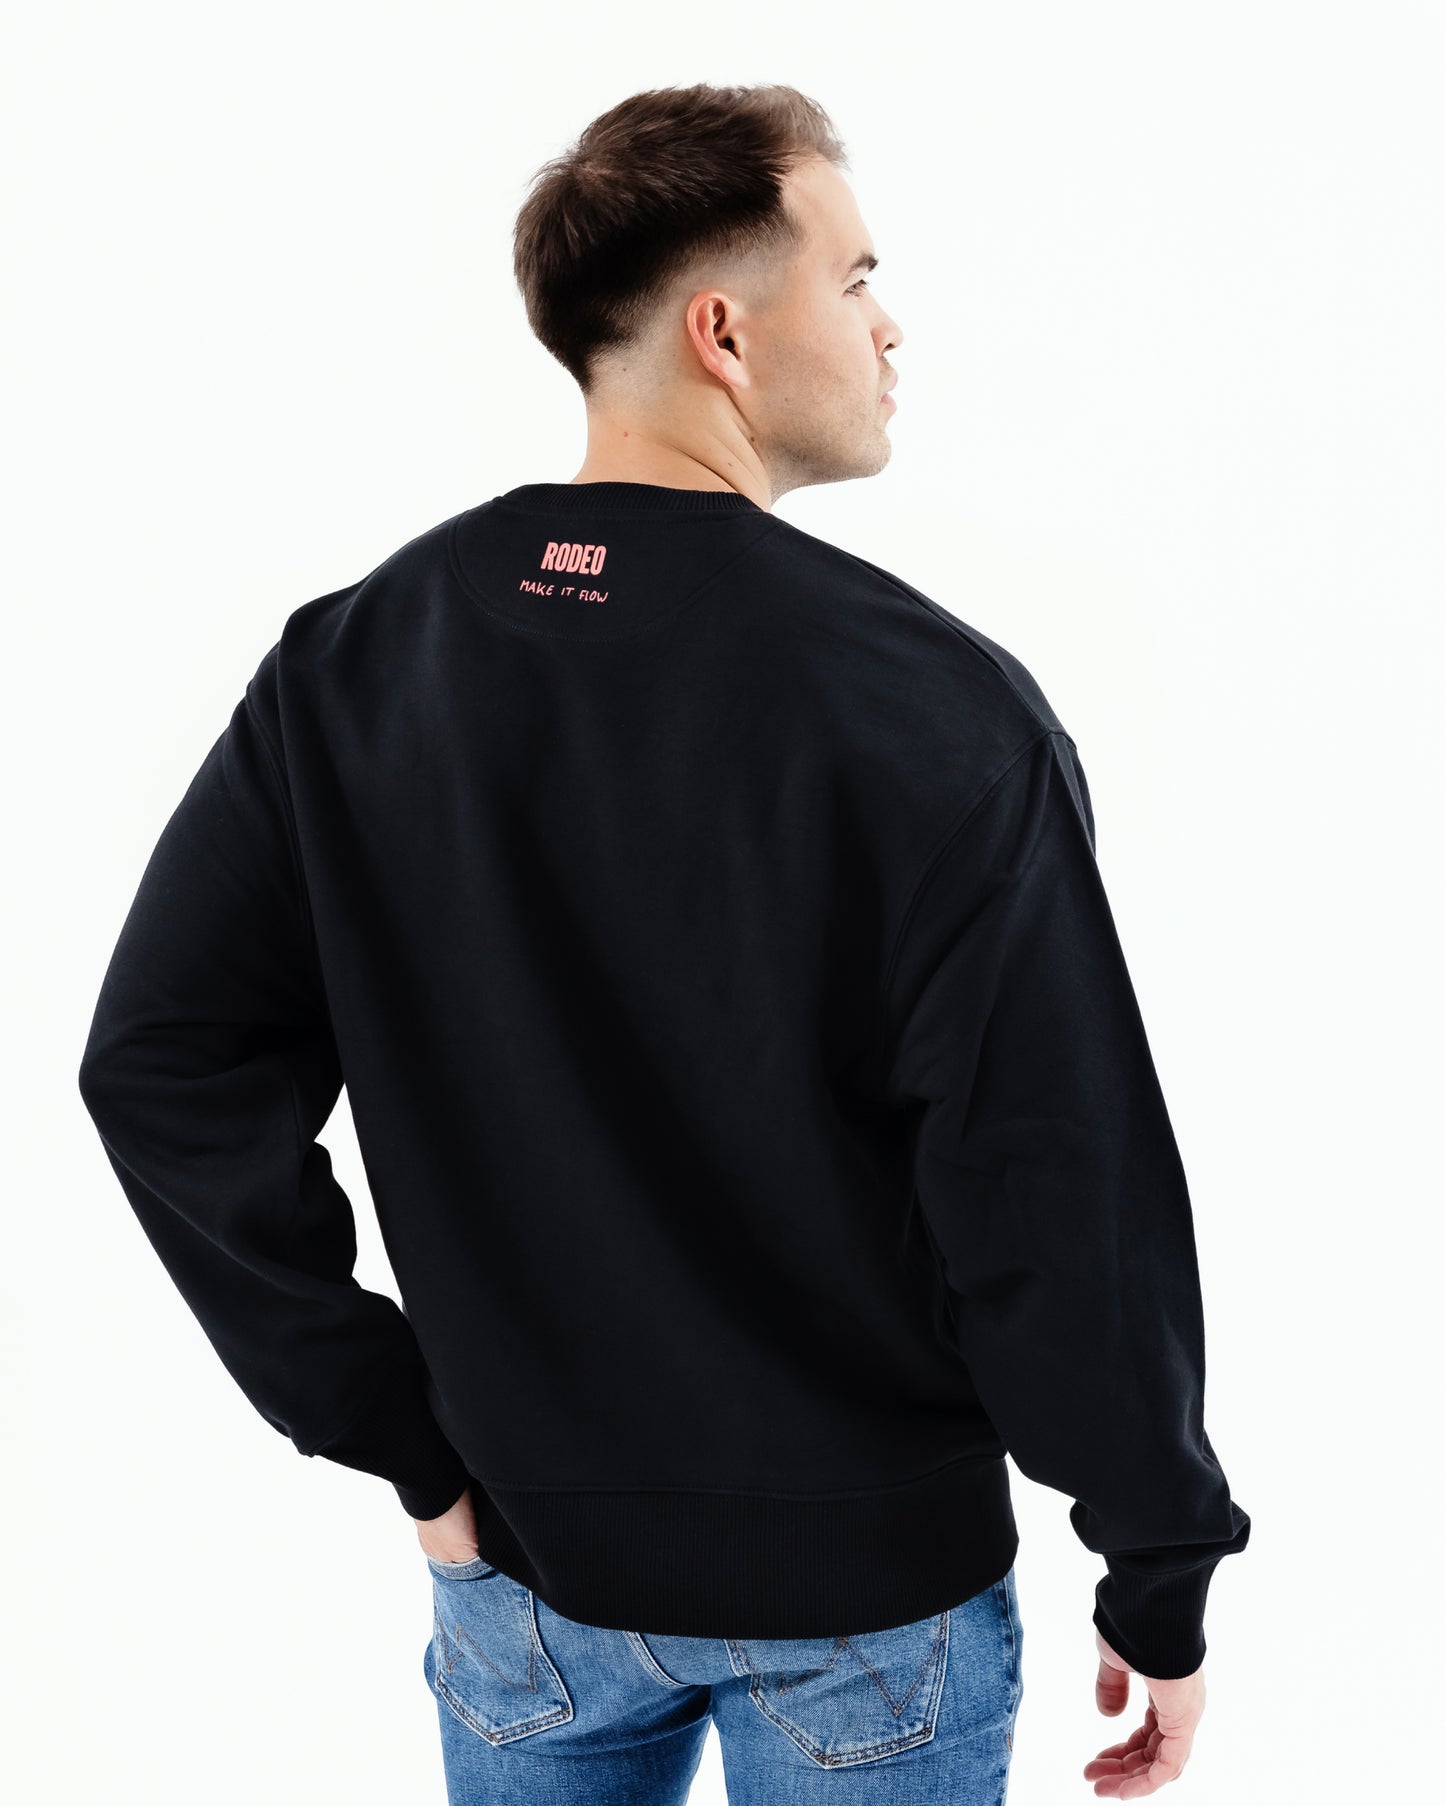 The Flow Black Sweater